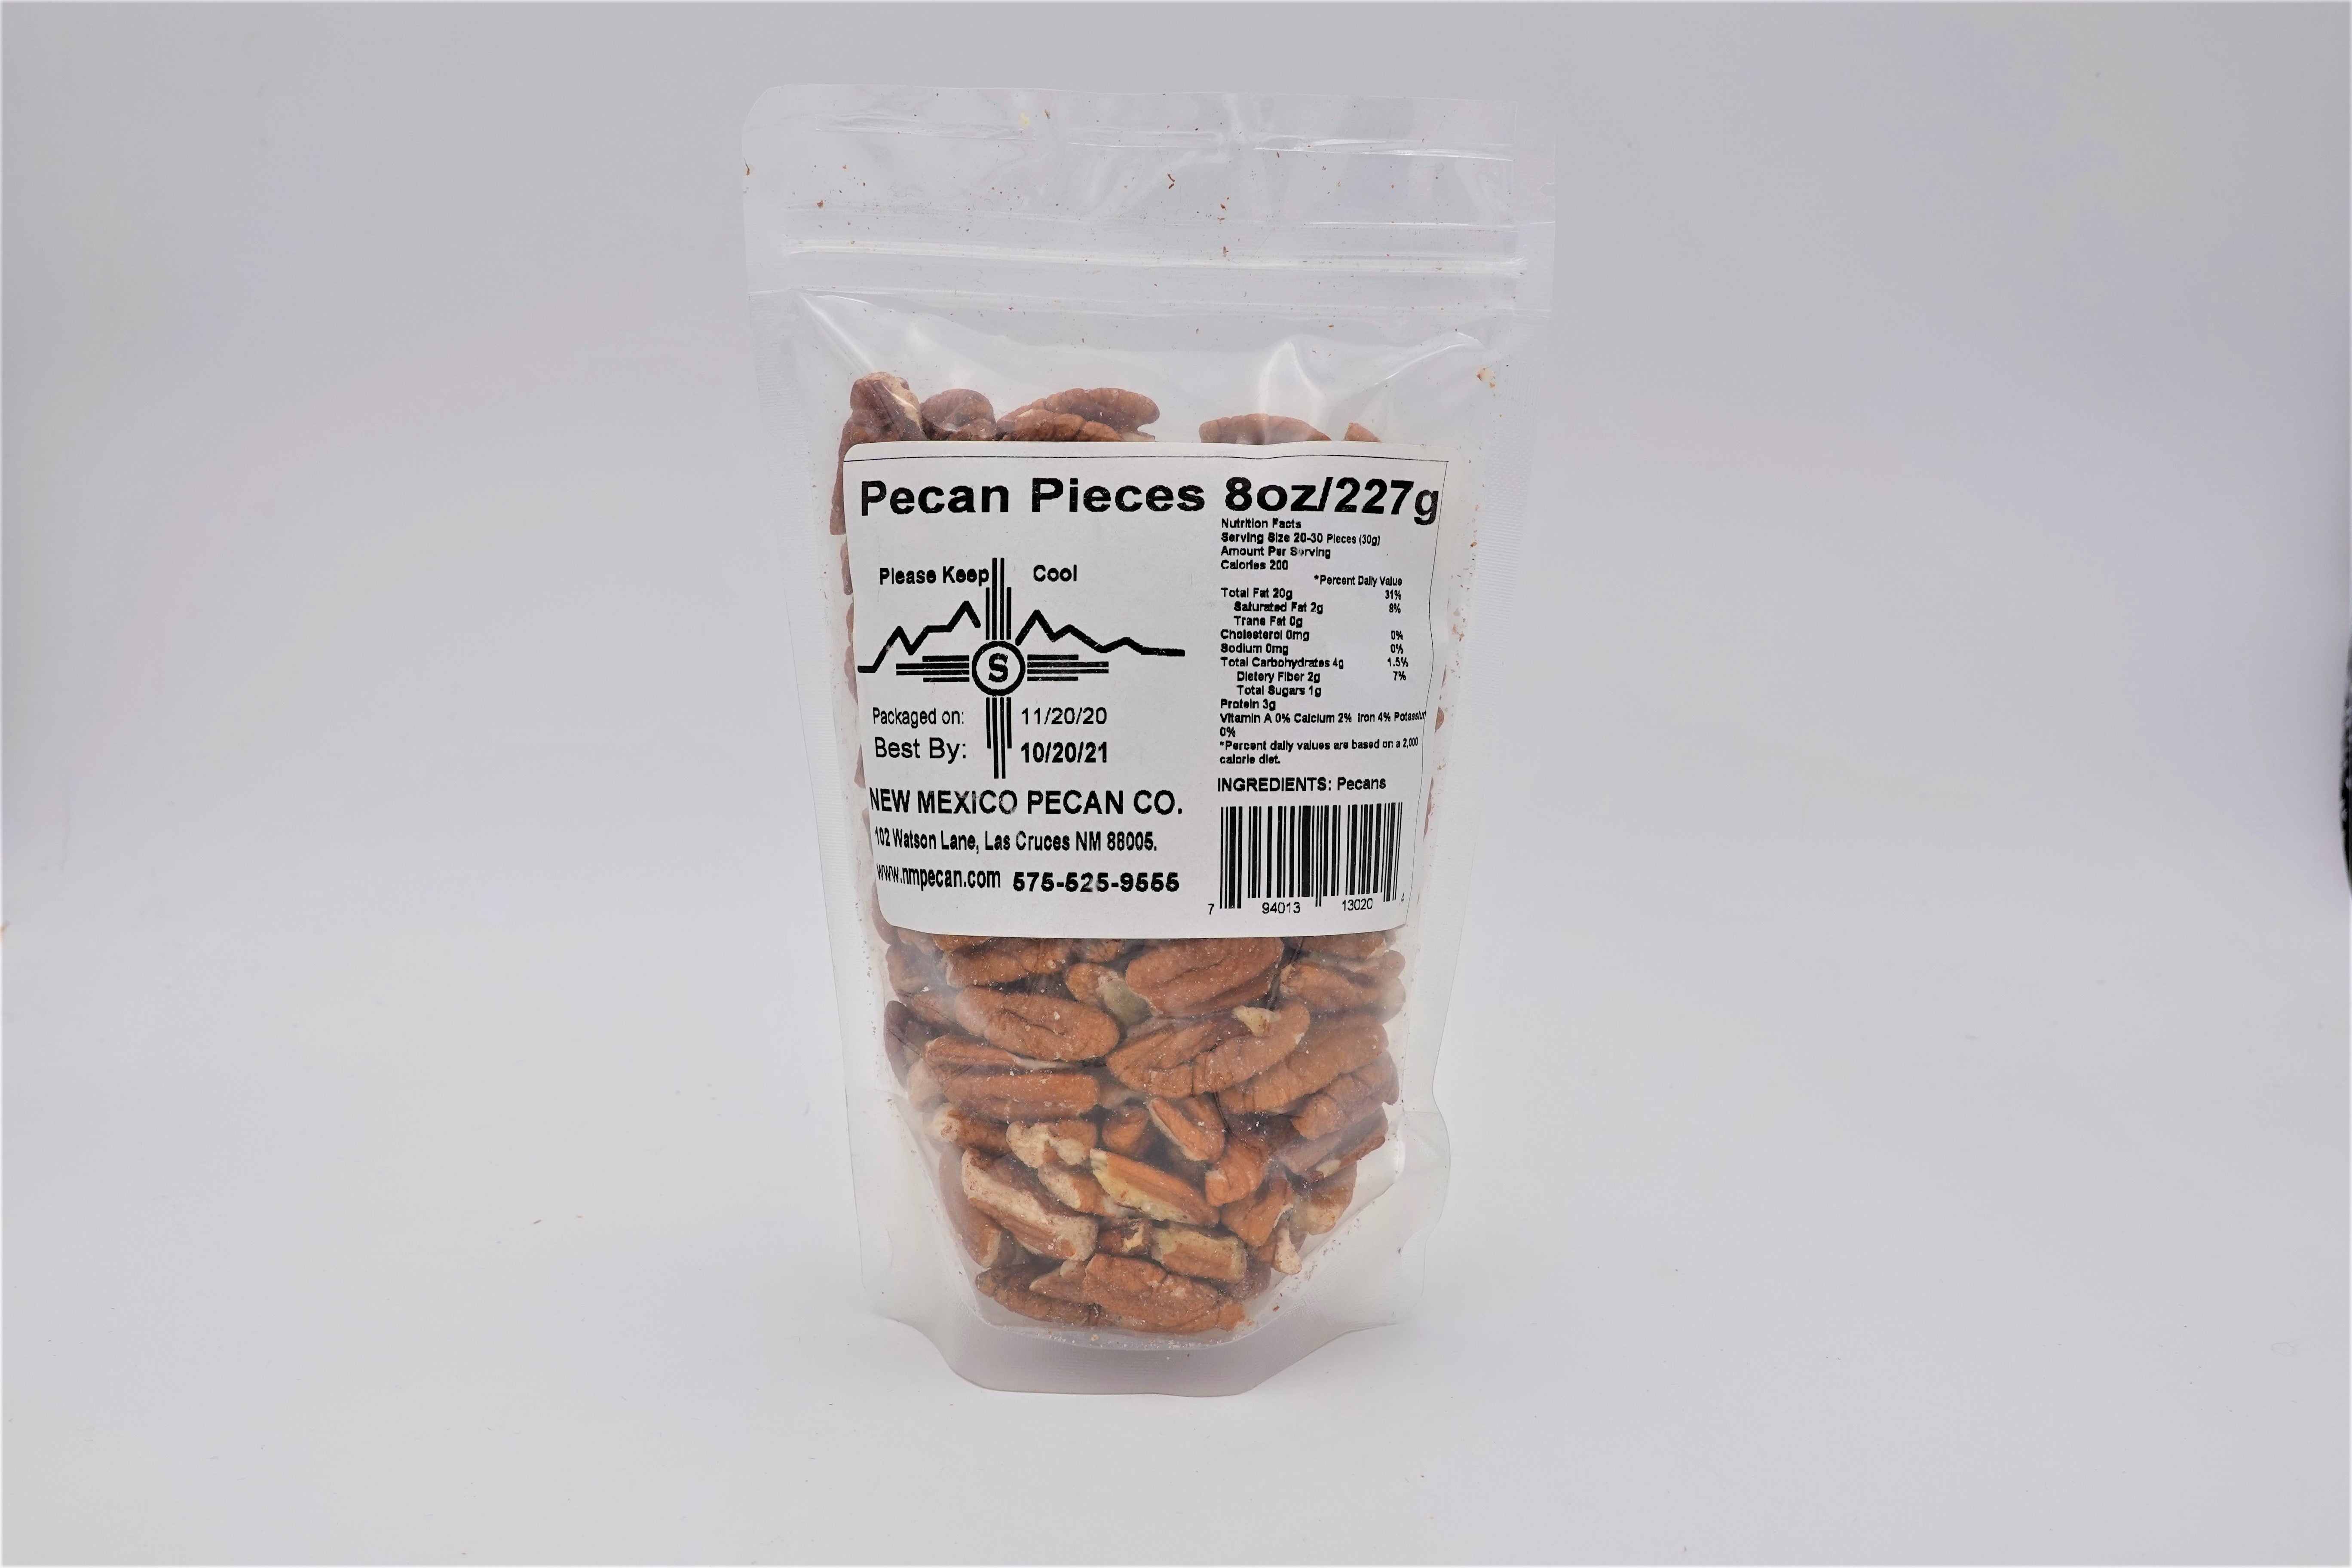 Sentence with product name: A sealed plastic bag containing 8 ounces of Pecan Pieces set against a plain white background. The label includes nutritional information and indicates the product is "fresh packed.